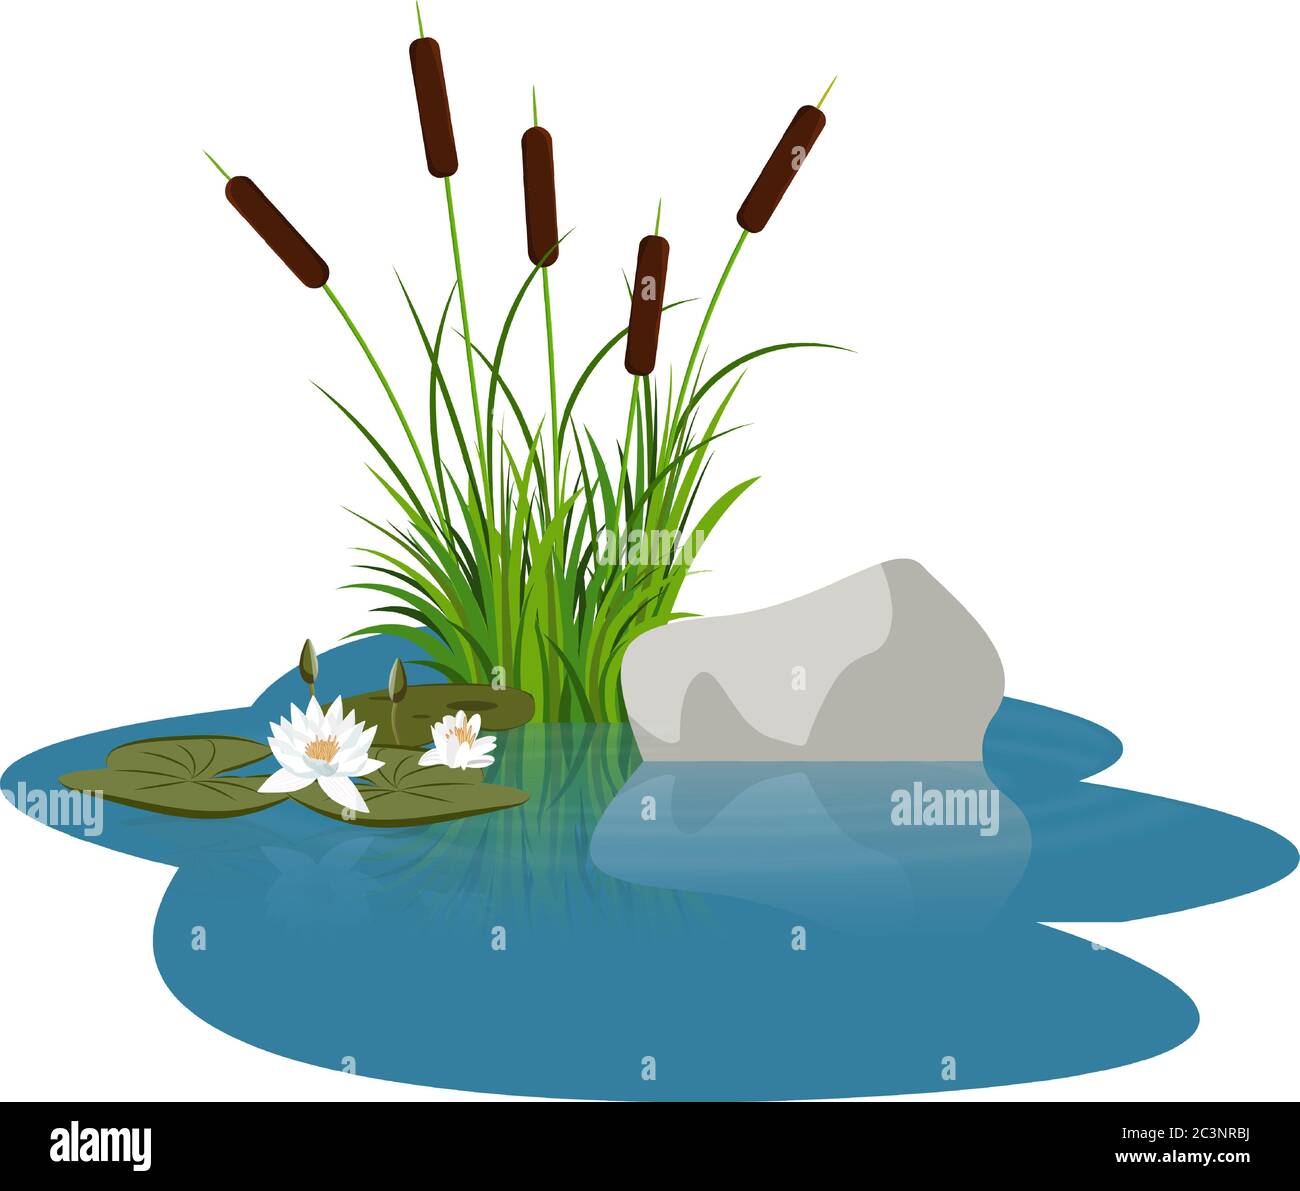 Bush reeds with lotus water lily leafes near stone on the water. Reeds stern, water lily and grey stone reflected in the lake water with water rounds. Stock Vector